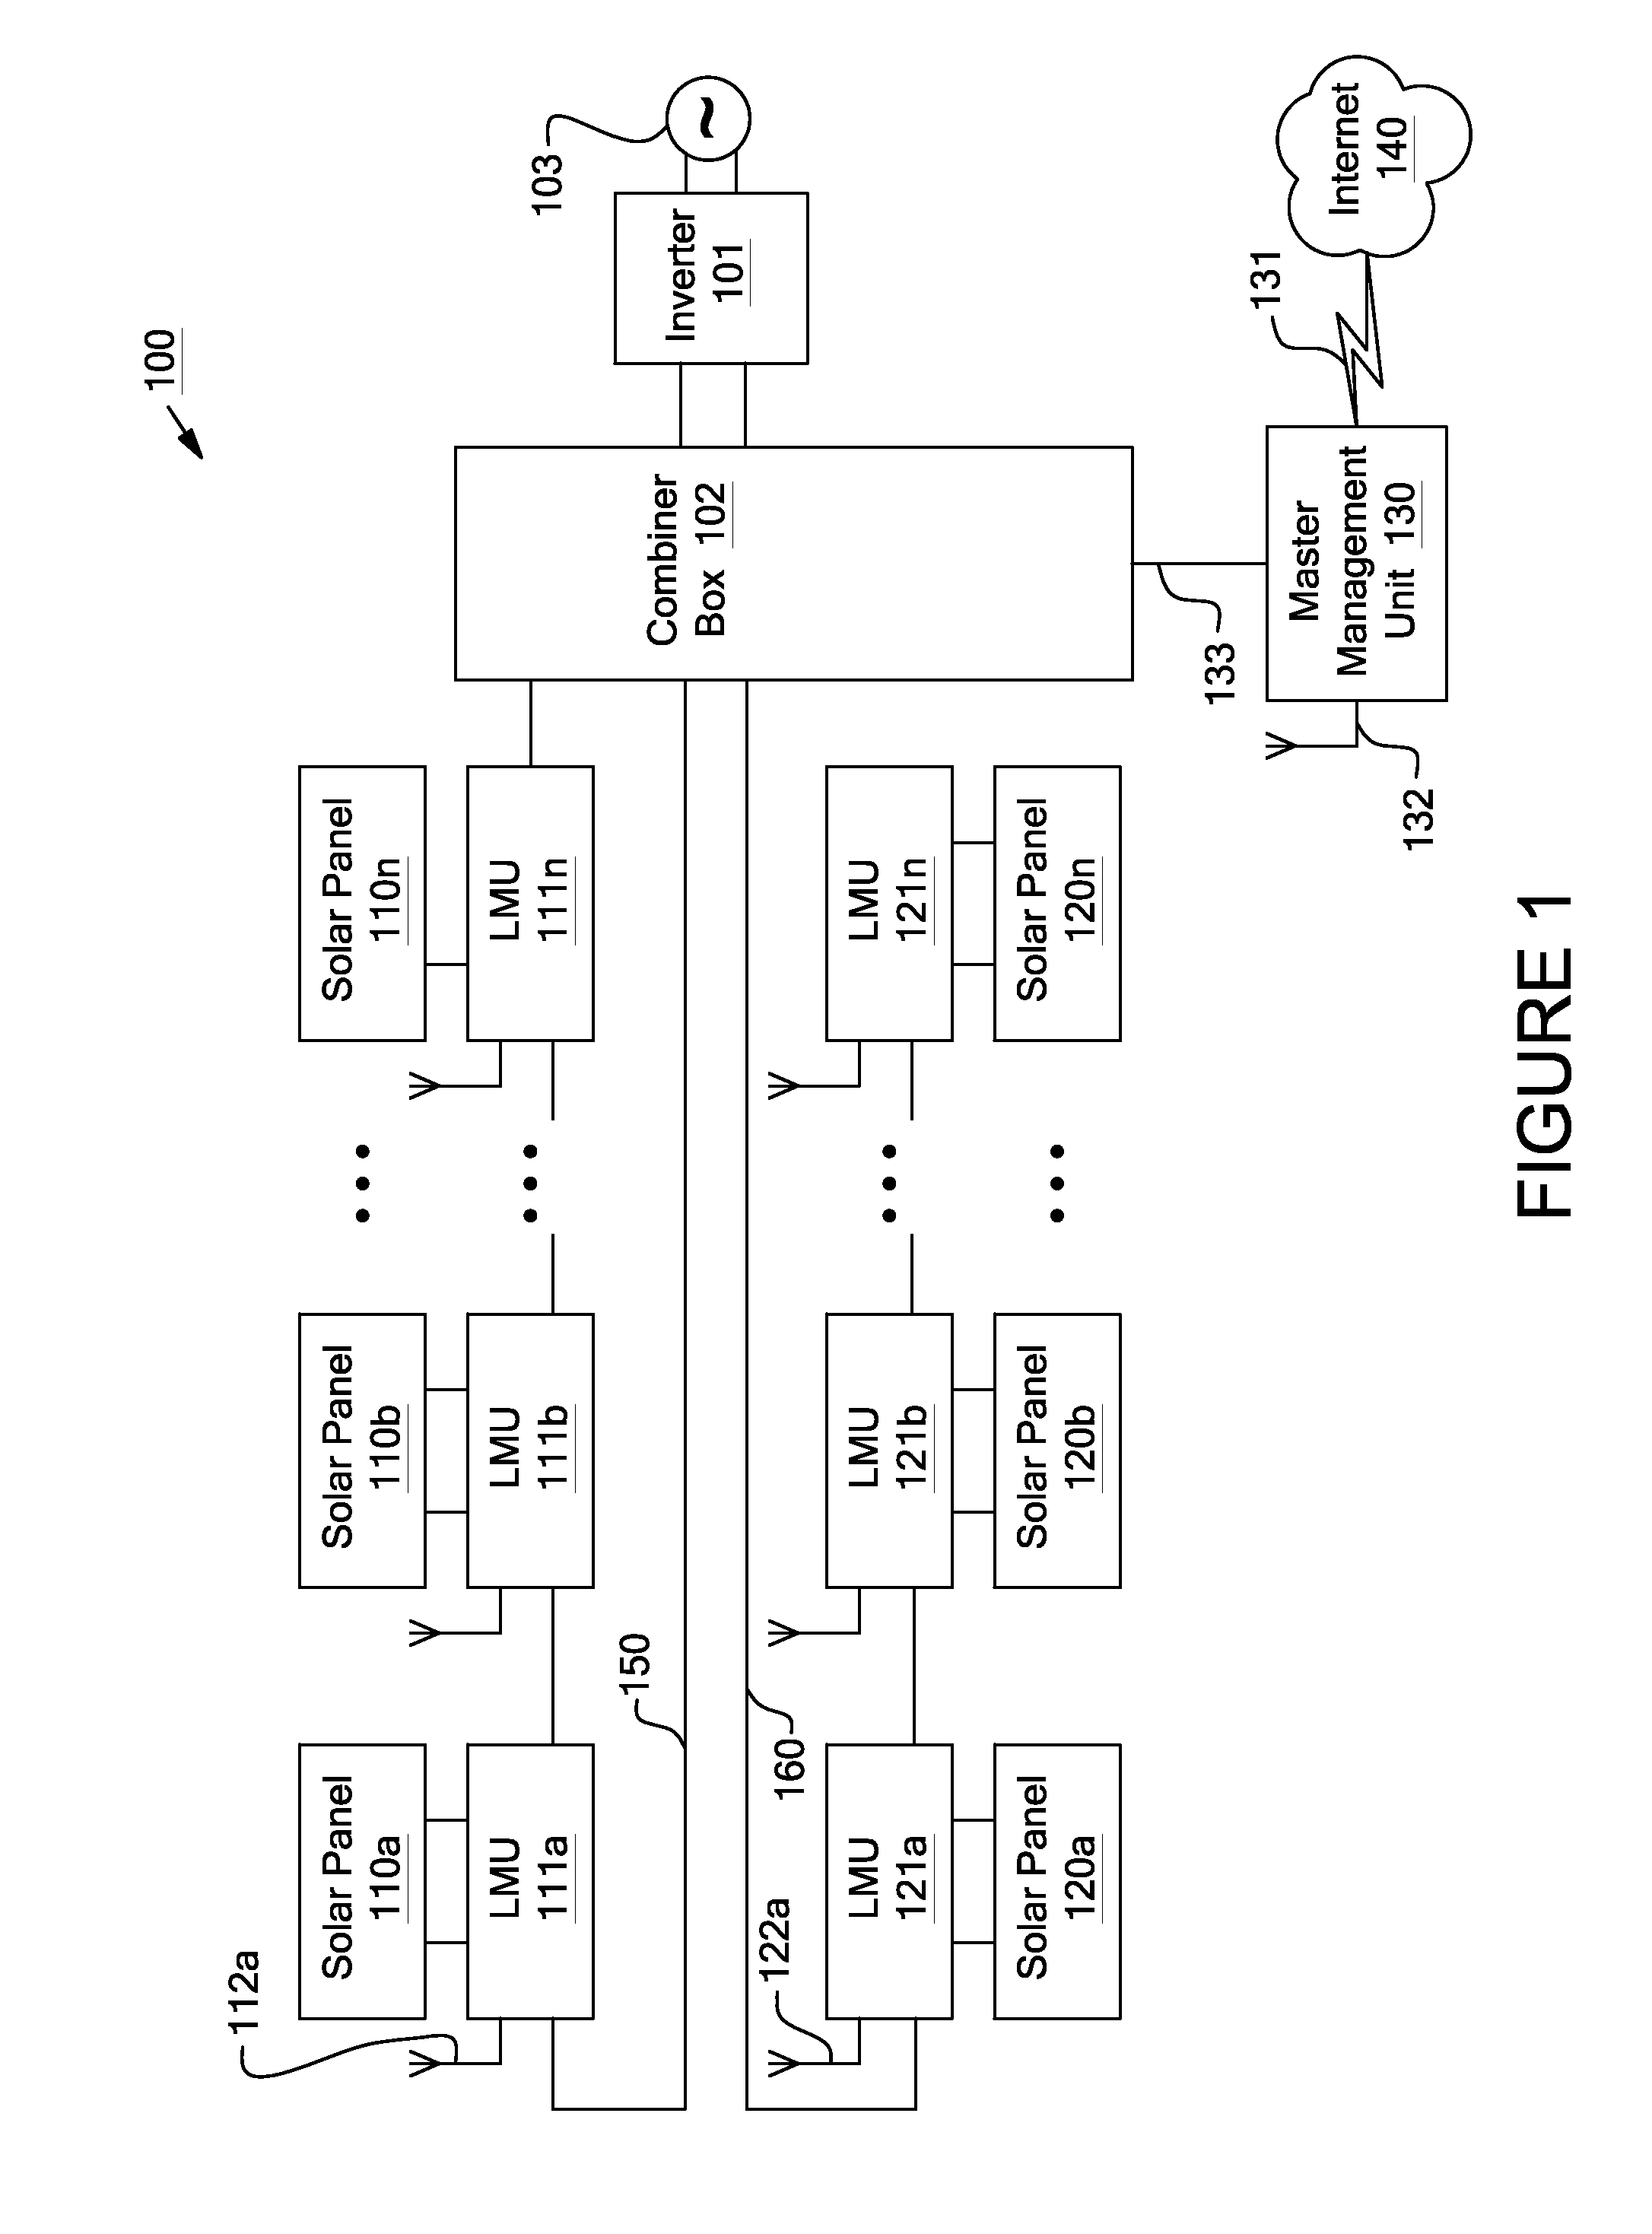 Systems and methods for remote or local shut-off of a photovoltaic system